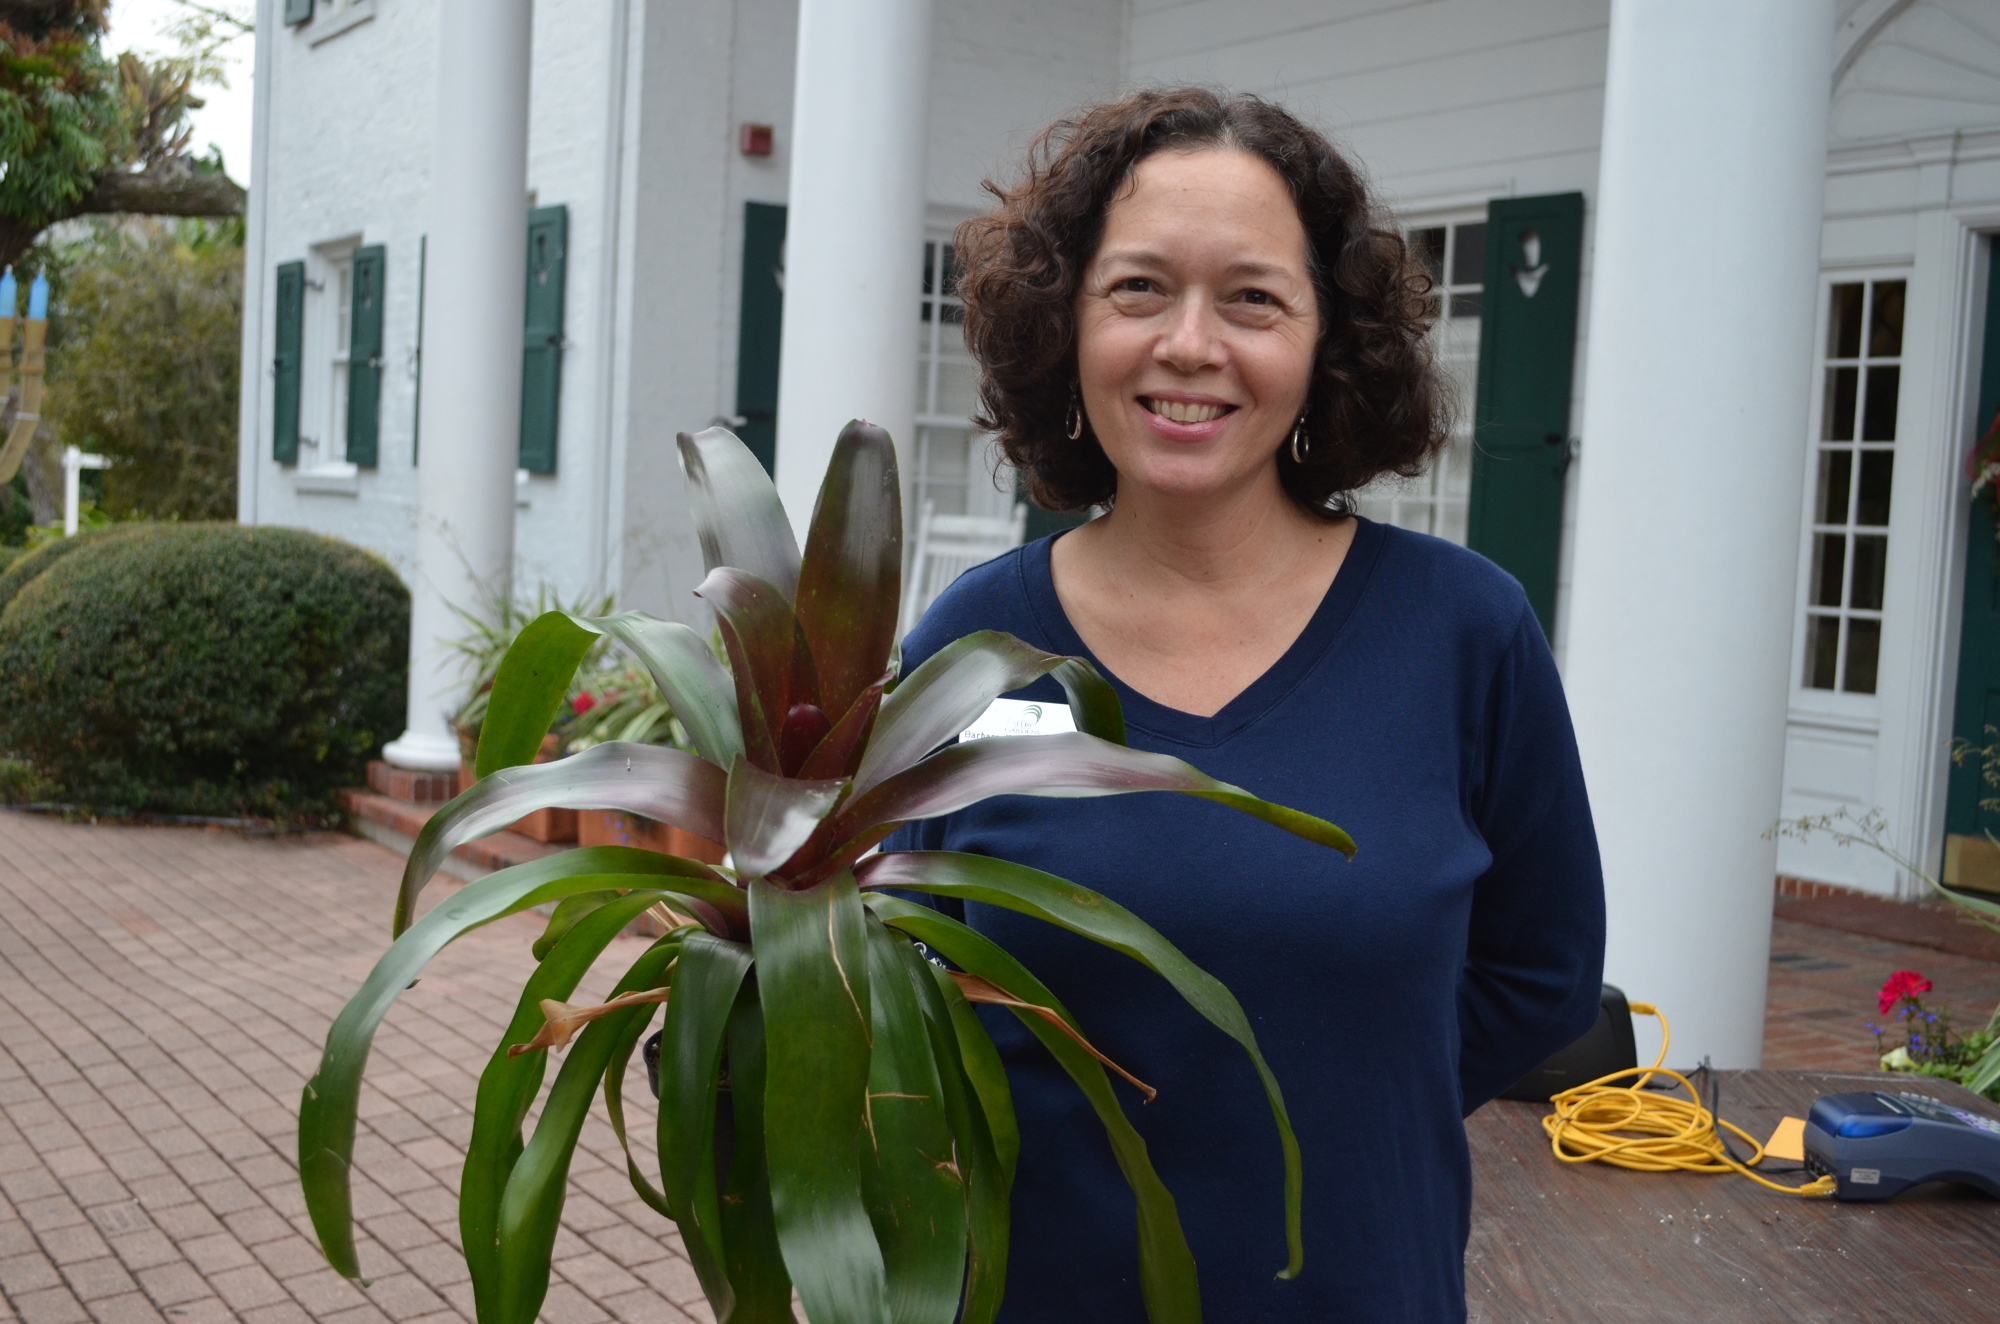 Barbara Kaminsky-Stern with the bromeliad she purchased from the sale Thursday, Jan. 7 at Marie Selby Botanical Gardens.